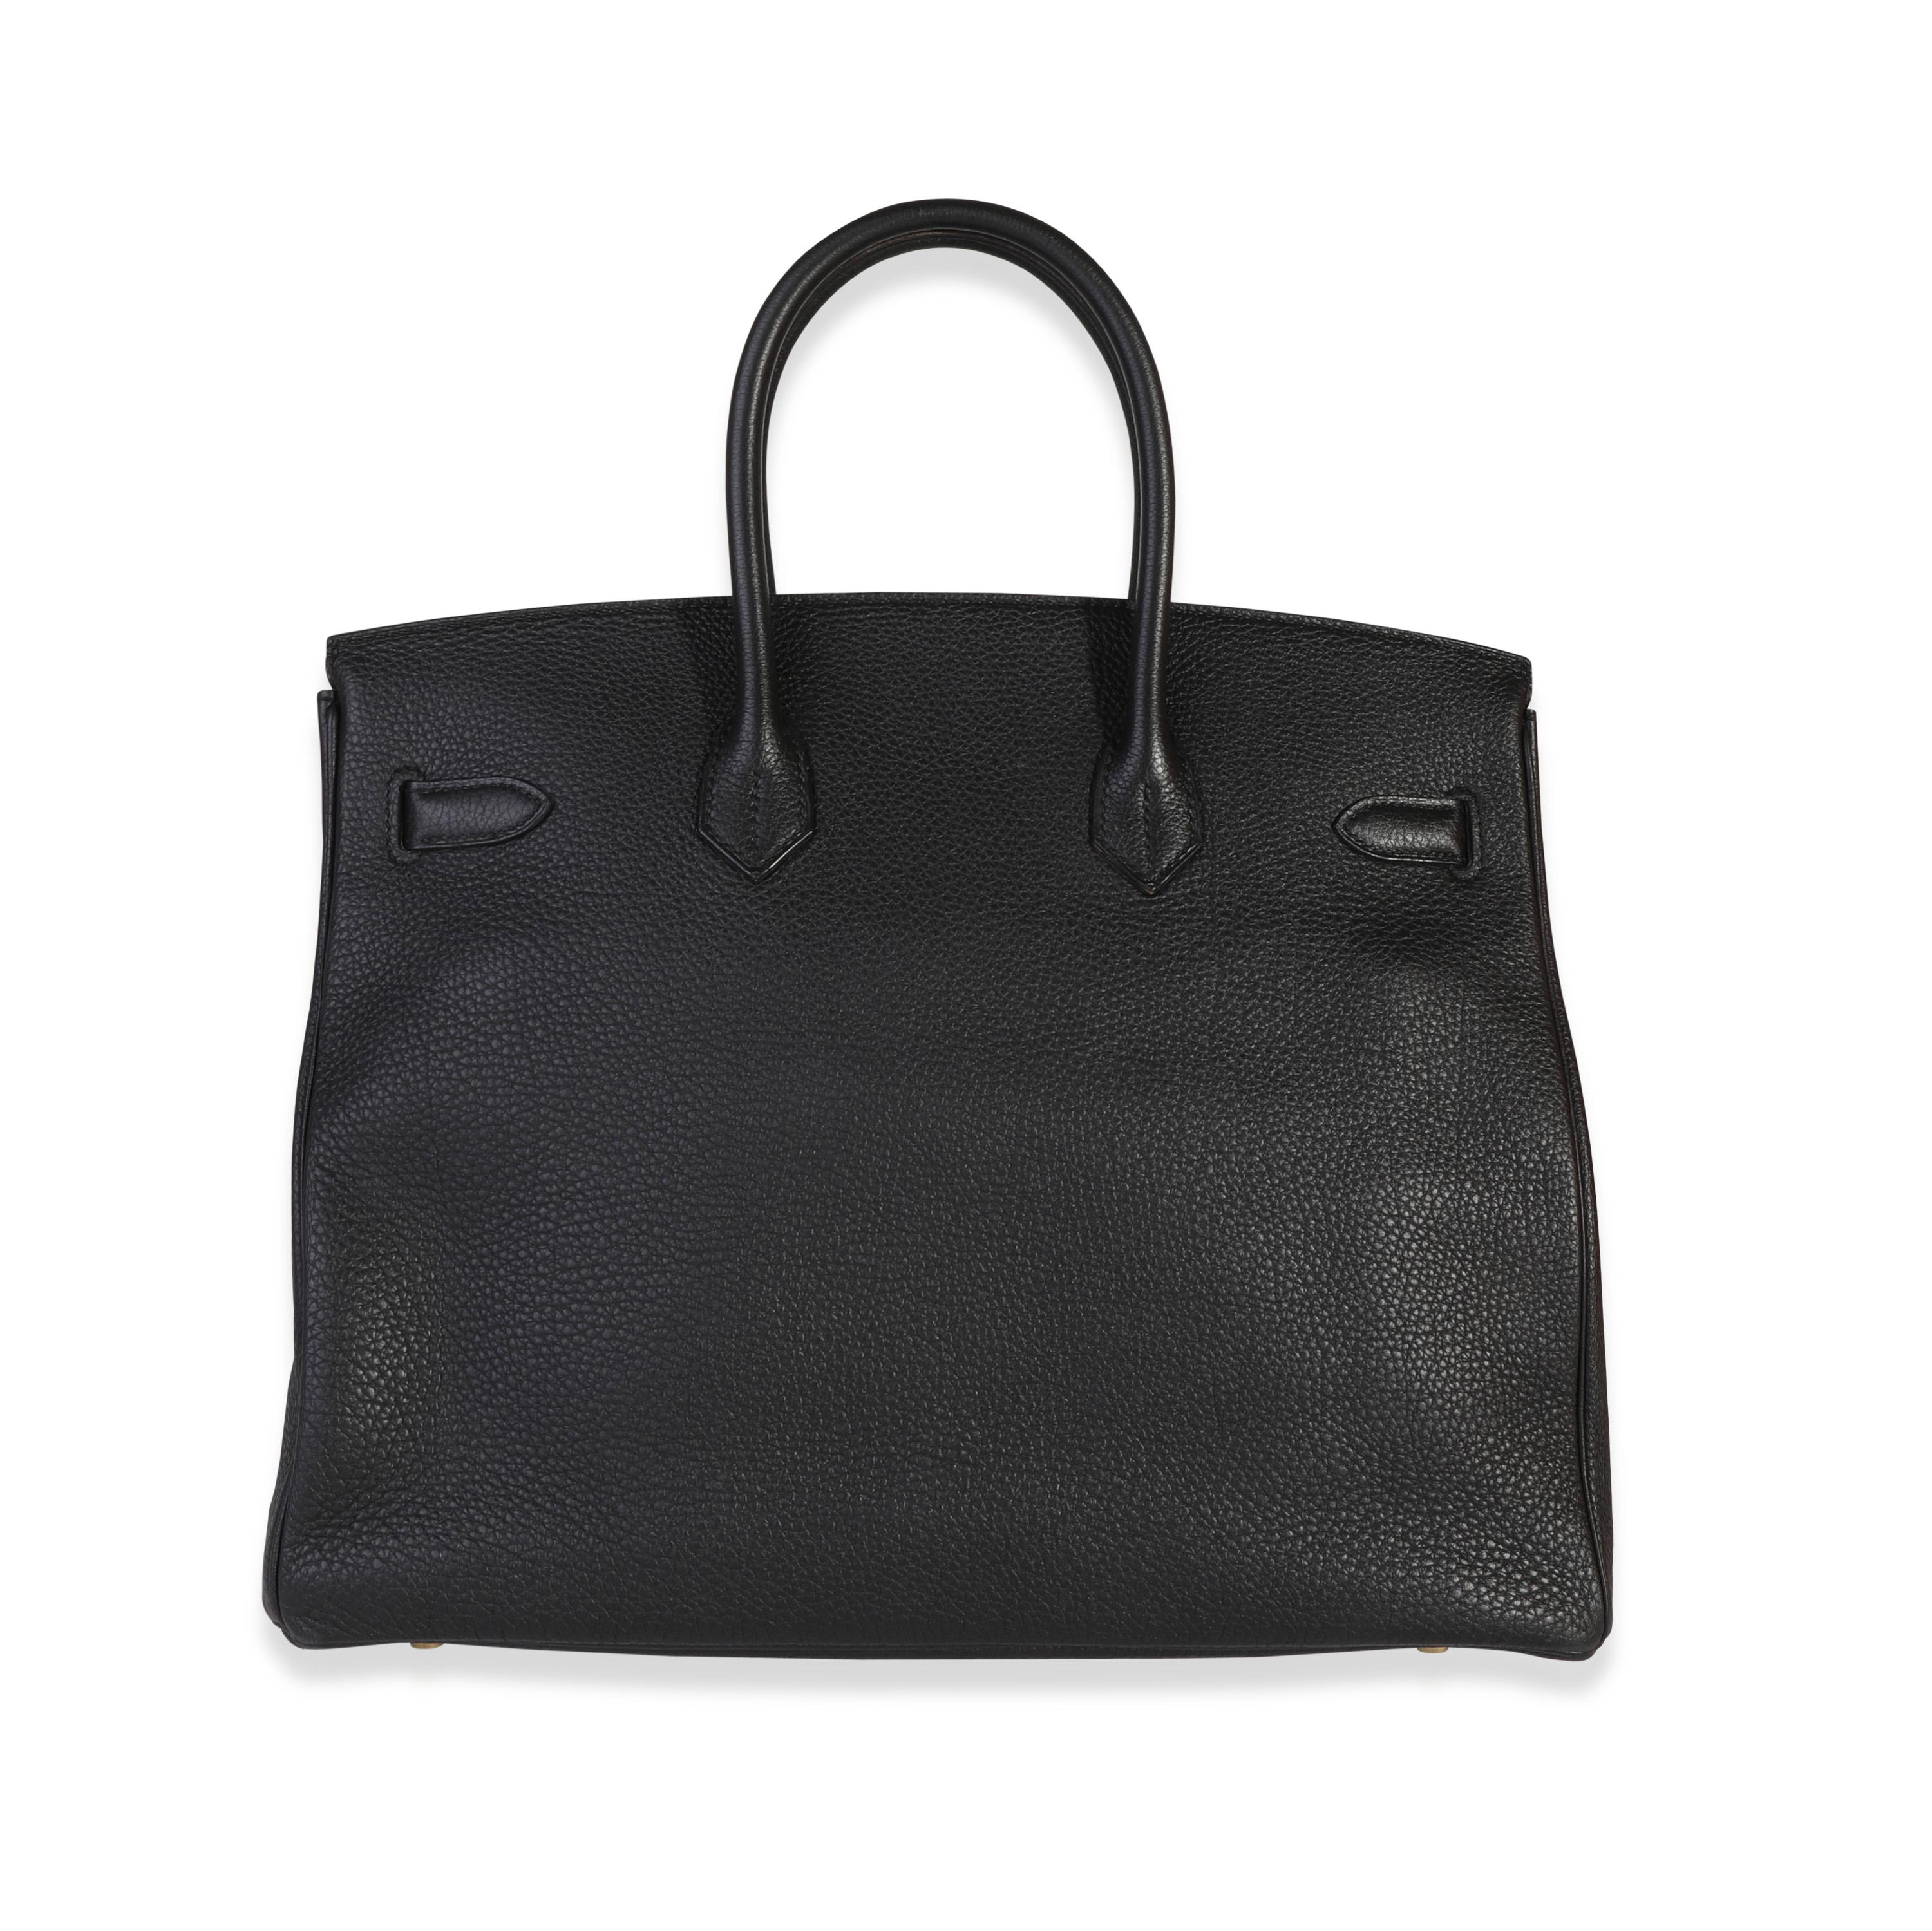 Listing Title: Hermès Black Togo Birkin 35 GHW
SKU: 118792
Condition: Pre-owned 
Handbag Condition: Very Good
Condition Comments: Very Good Condition. Light scuffing to corners. Scuffing and faint splitting to handles. Light marks to exterior.